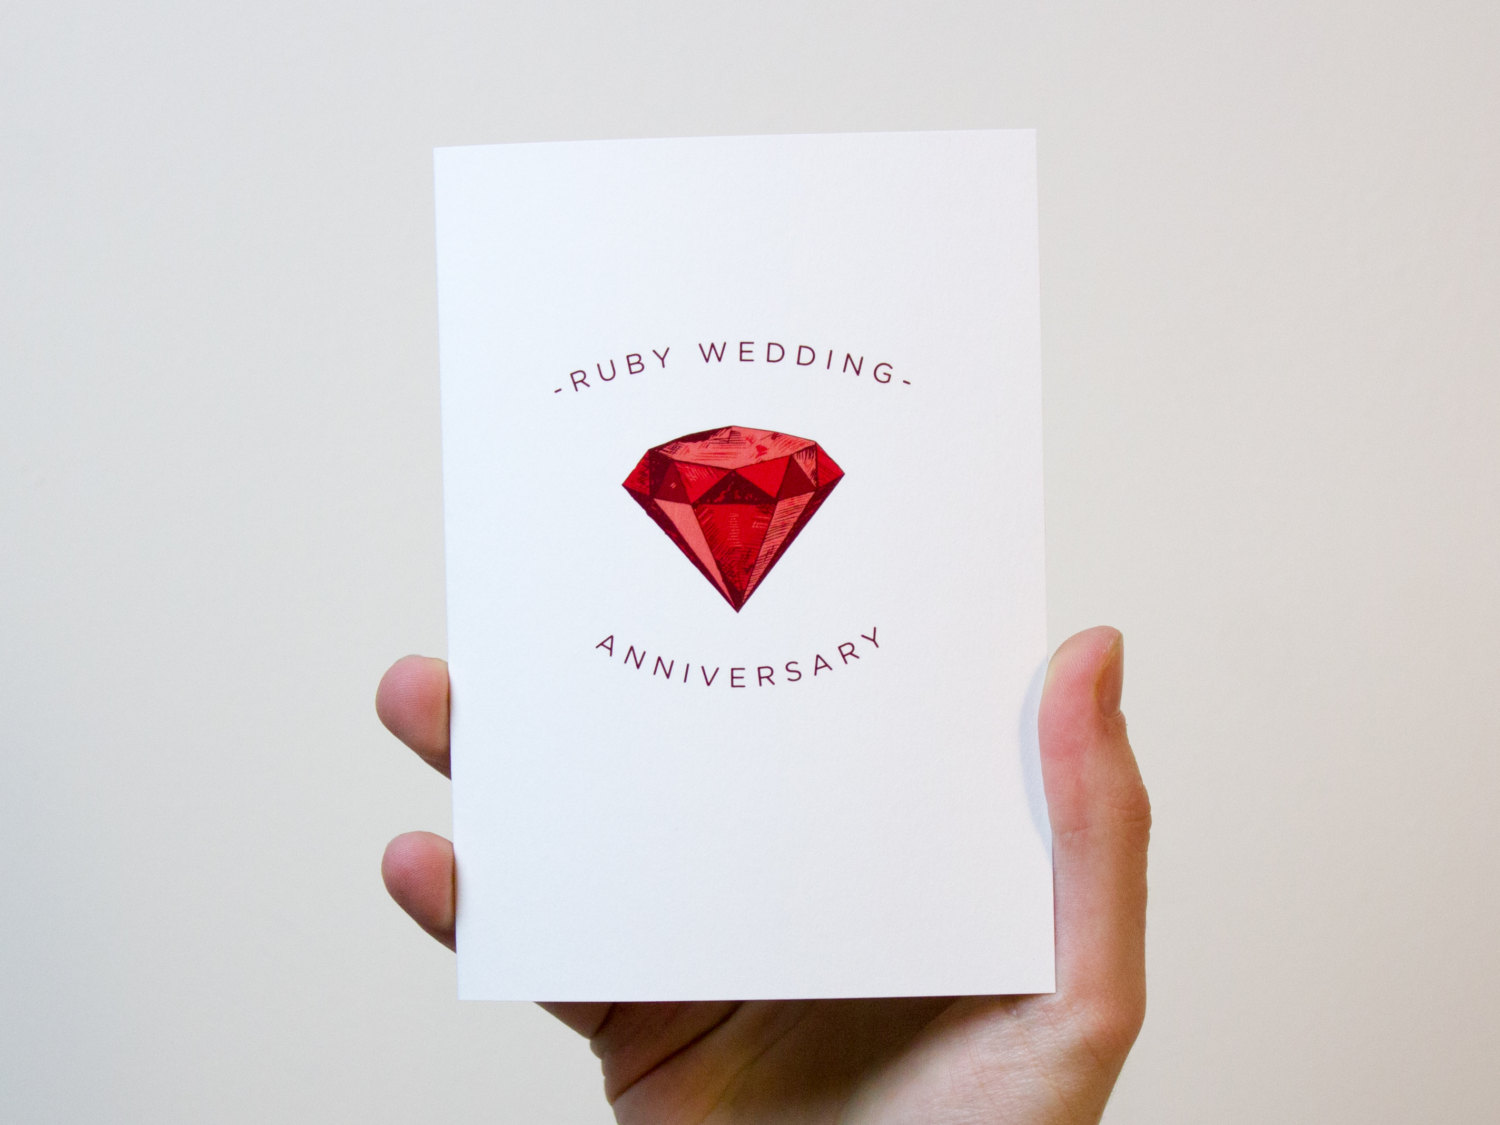 If You Score Higher Than 15 on This Quiz, You're Walking Encyclopedia ruby wedding anniversary